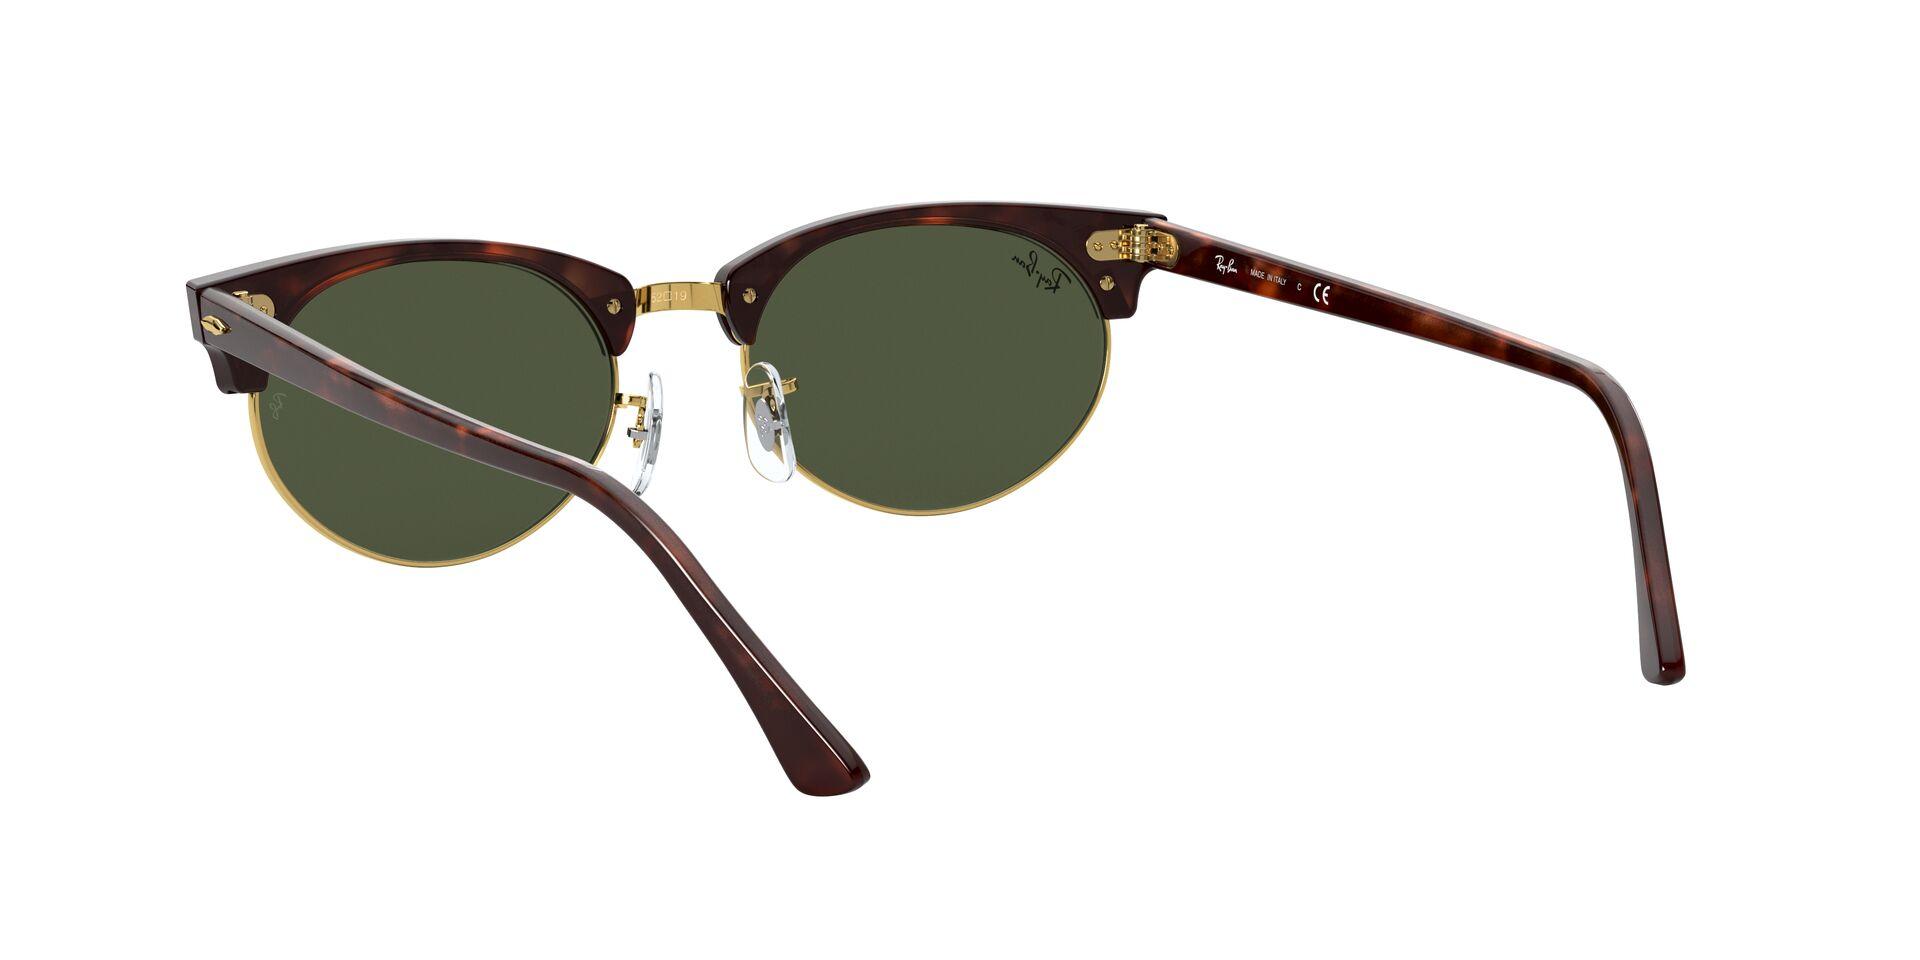 Mắt Kính RAY-BAN CLUBMASTER OVAL - RB3946 130431 -Sunglasses